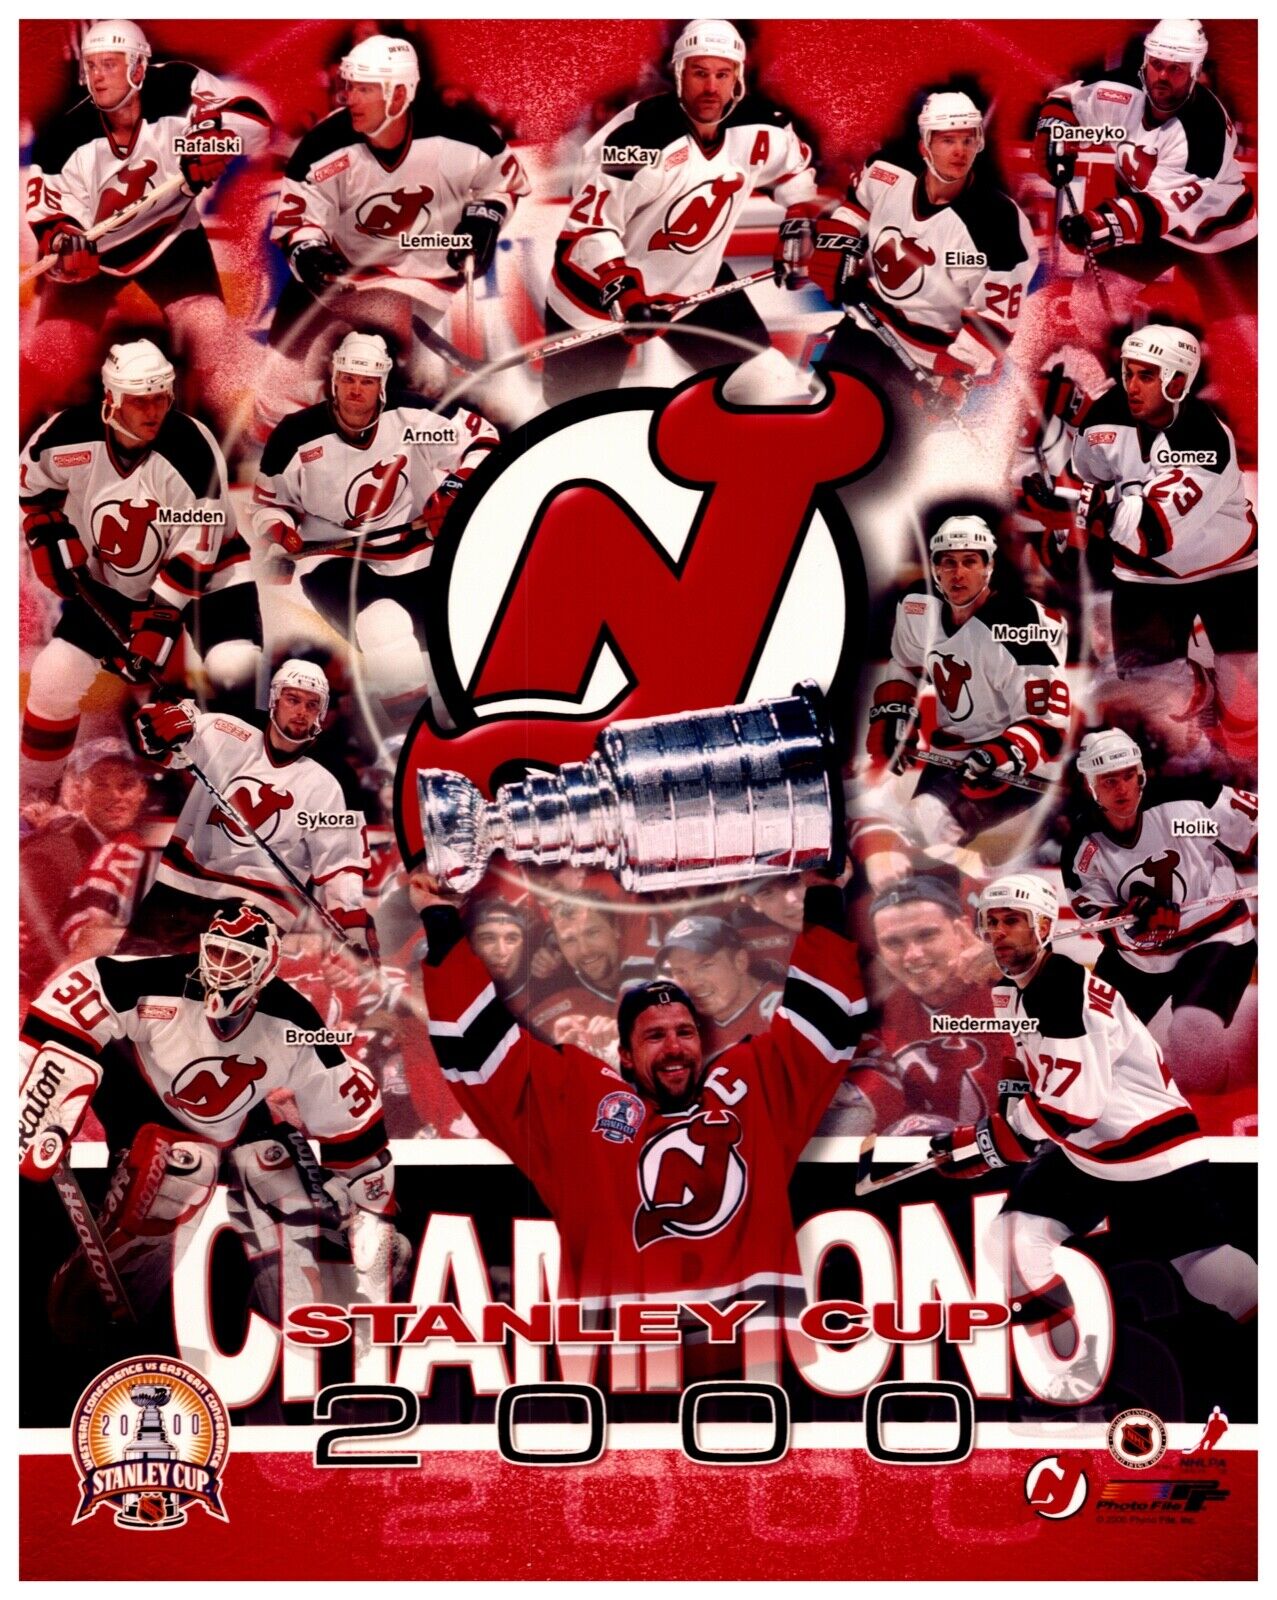 2000 Stanley Cup Champions New Jersey Devils Composite 8x10 Photo Photofile